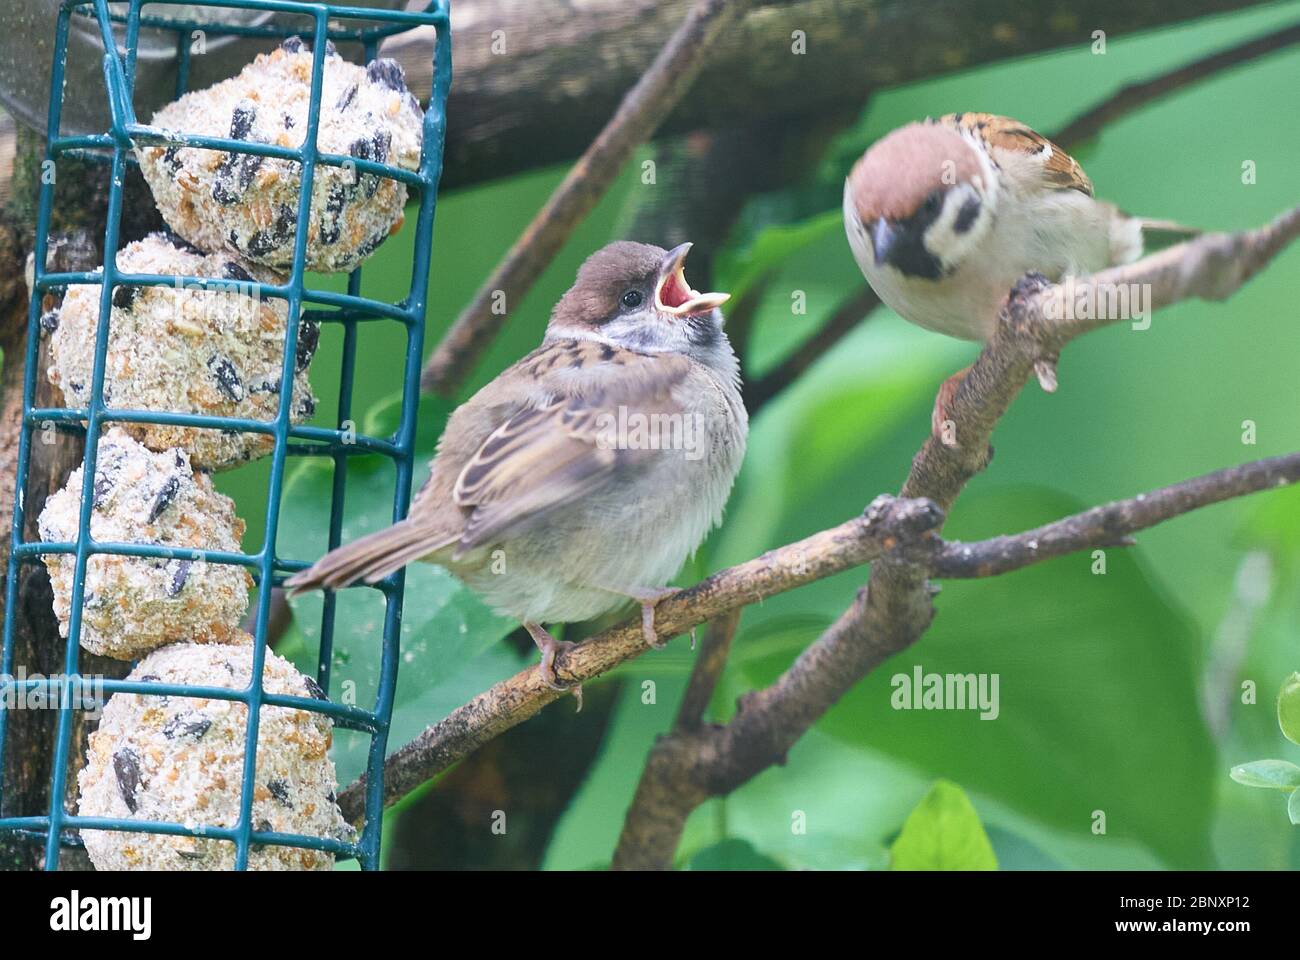 Marktoberdorf, Germany, 14th of May, 2020. Young baby sparrows feeding. © Peter Schatz / Alamy Stock Photos Stock Photo